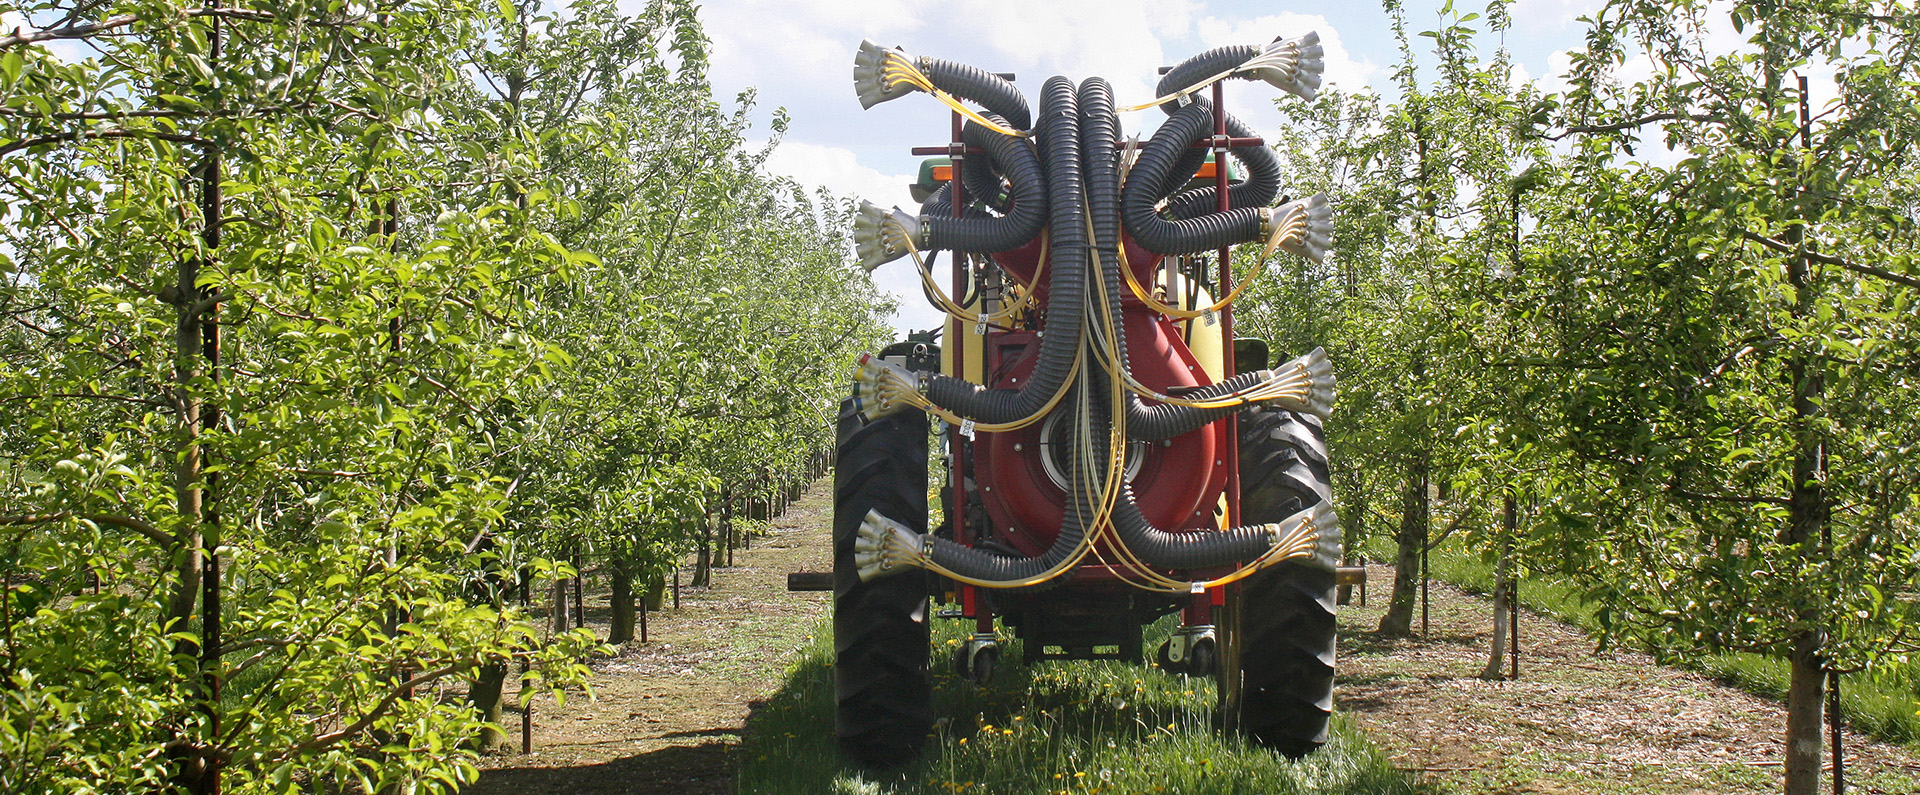 An automated spraying system in an orchard